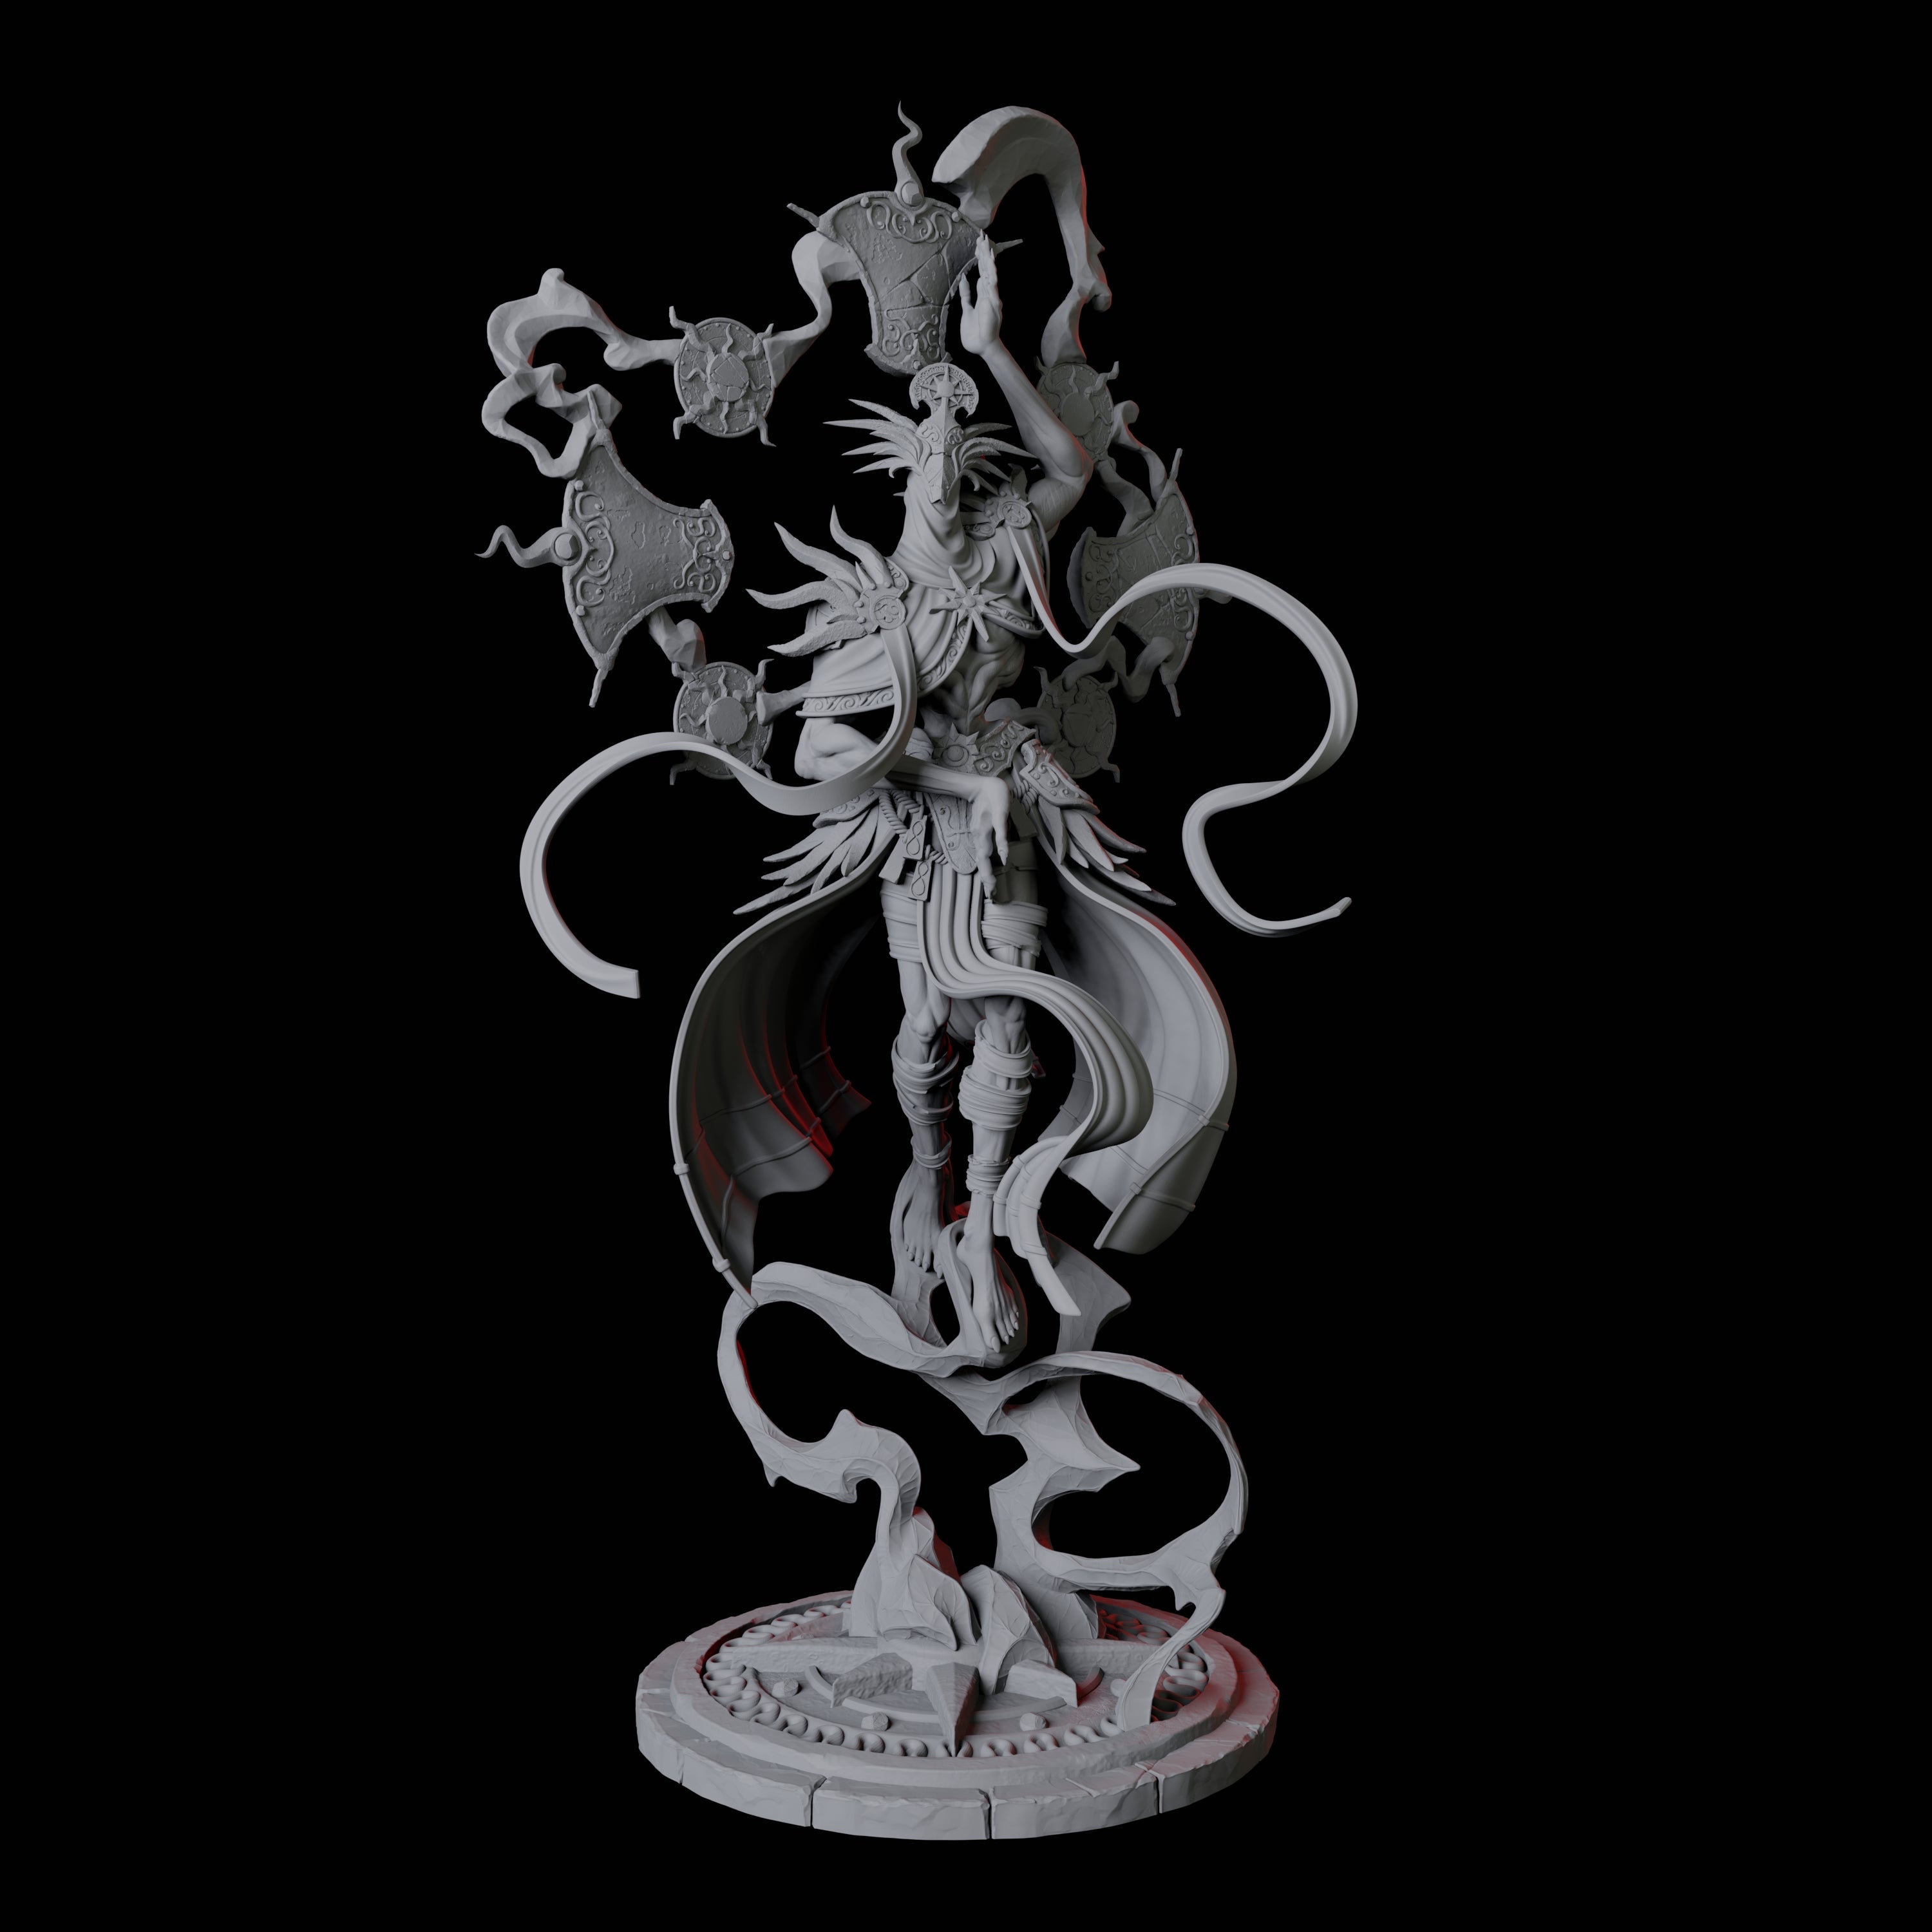 Sparking Celestial Mage C Miniature for Dungeons and Dragons, Pathfinder or other TTRPGs